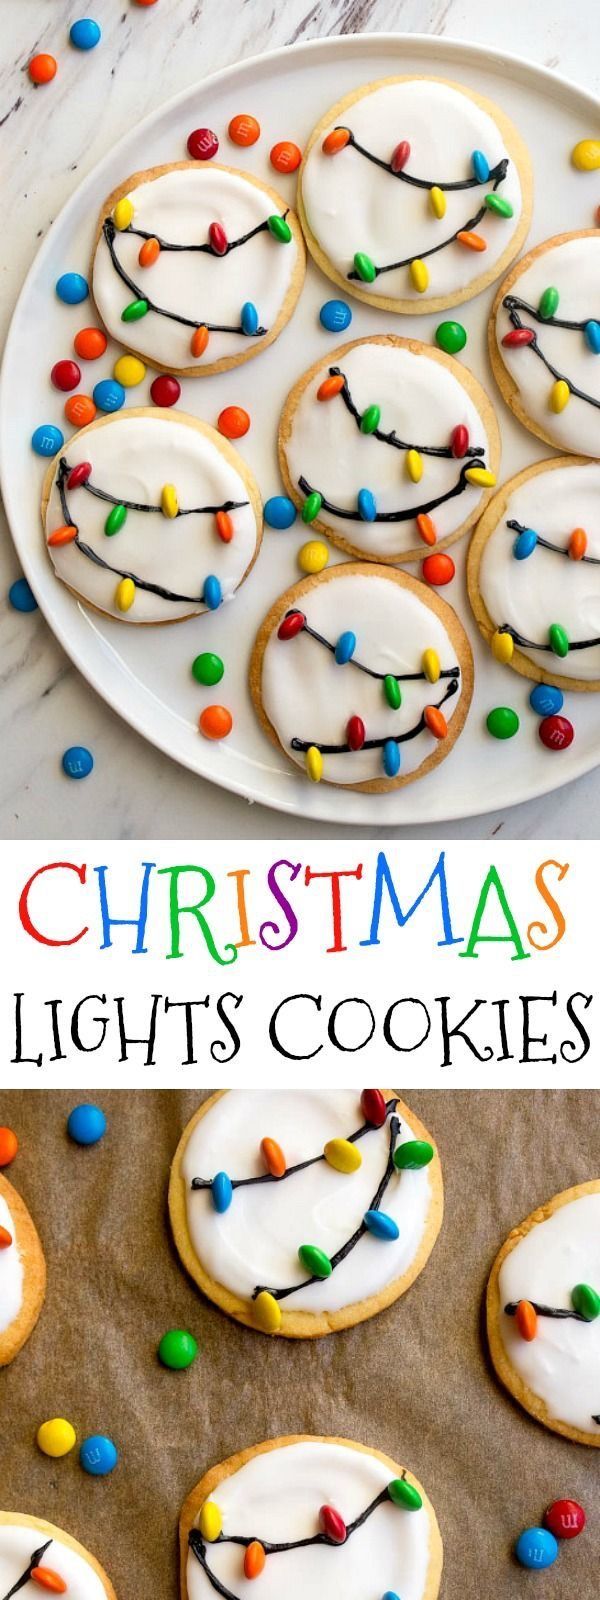 Christmas light cookies made with plain m&ms -   20 decor cookies diy
 ideas